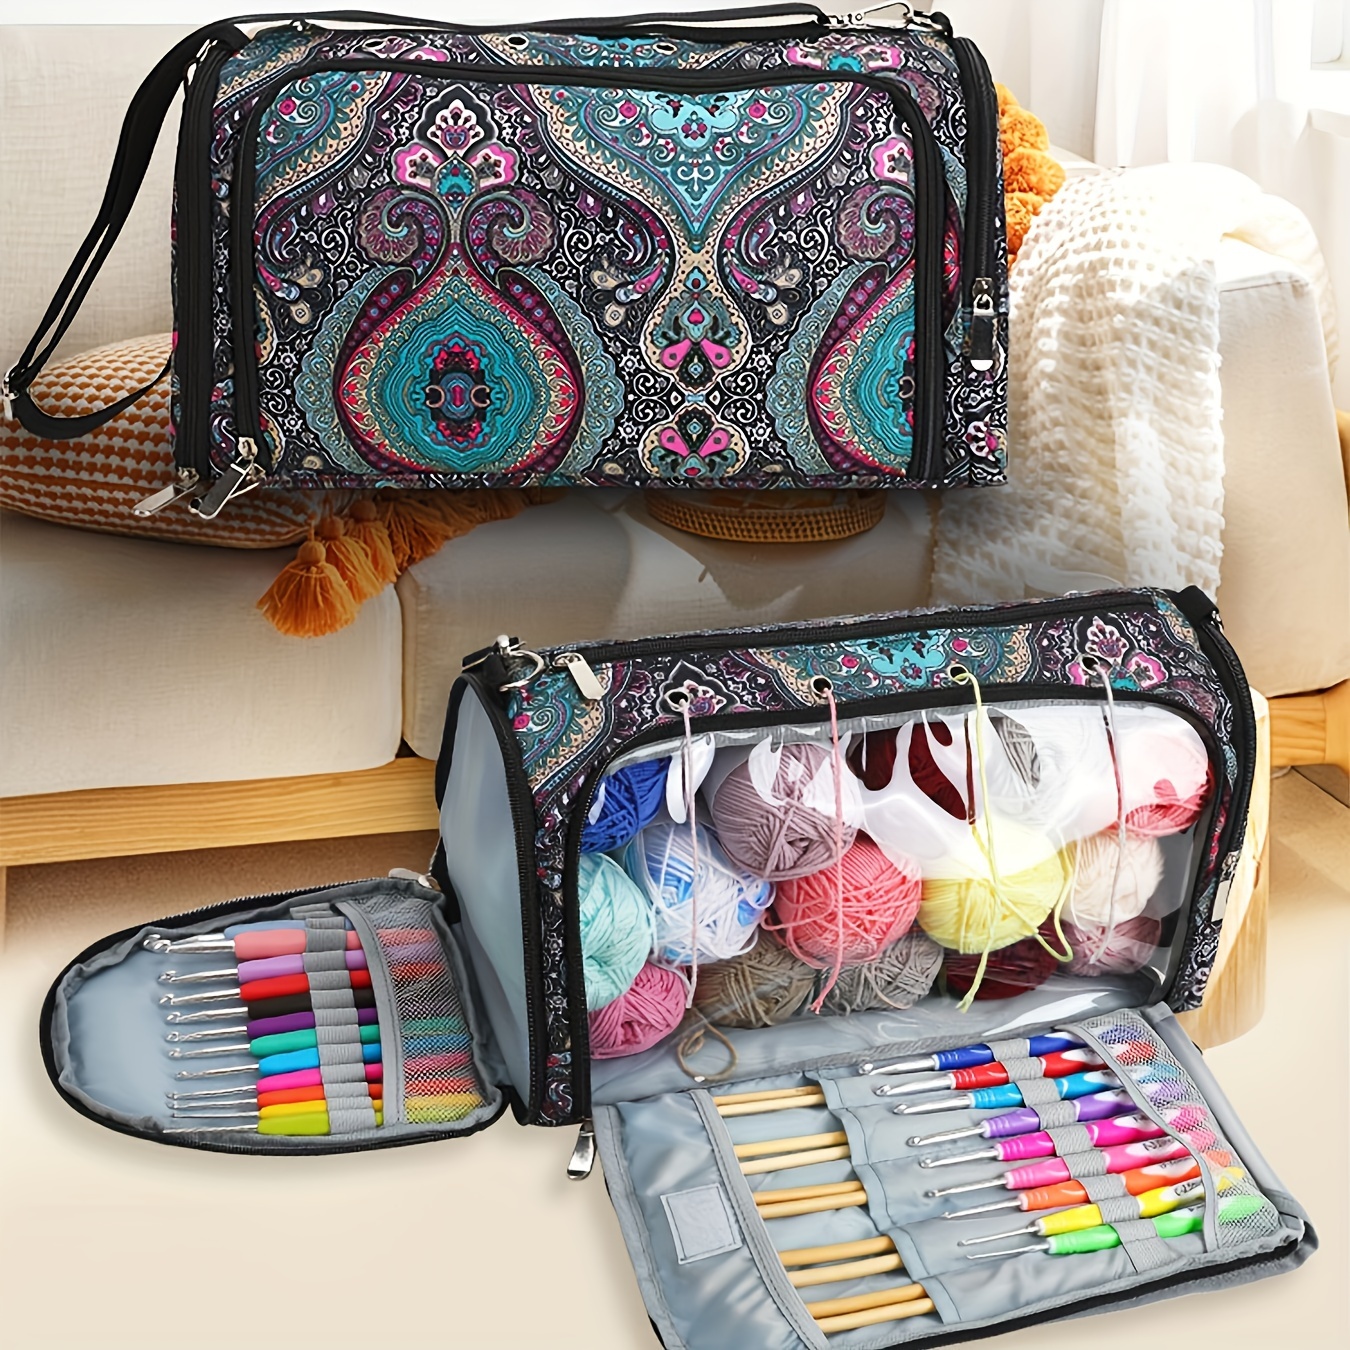 Large Craft Organizer to Store Crocheting & Knitting Supplies Portable Yarn  Storage With 7 Pockets for Tools, Shoulder Strap and Handle 